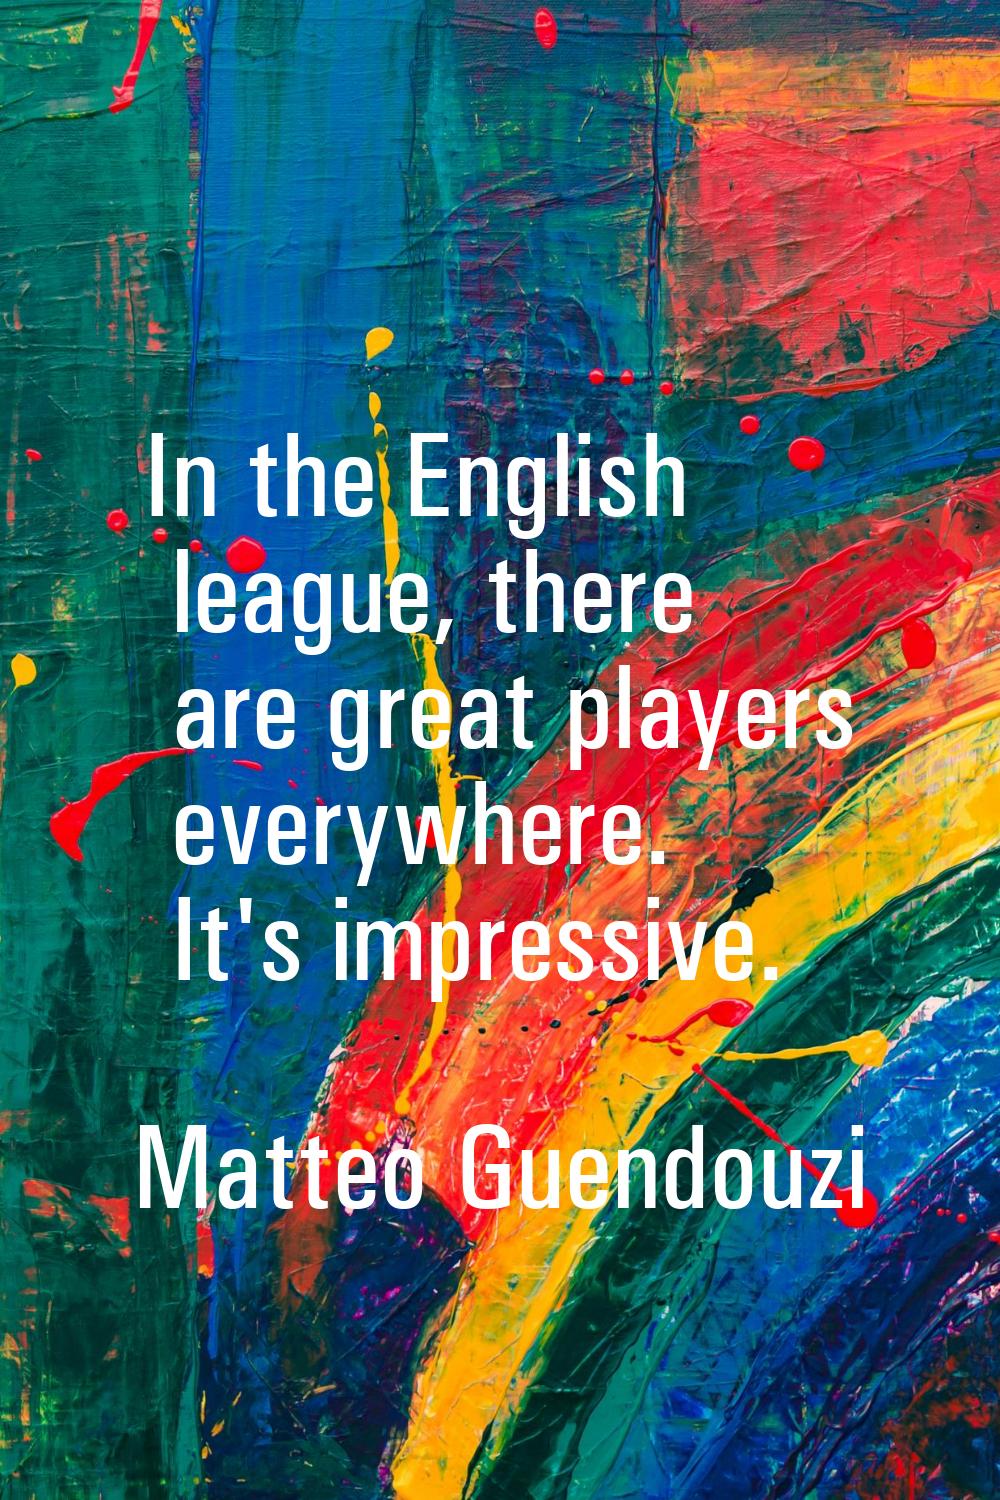 In the English league, there are great players everywhere. It's impressive.